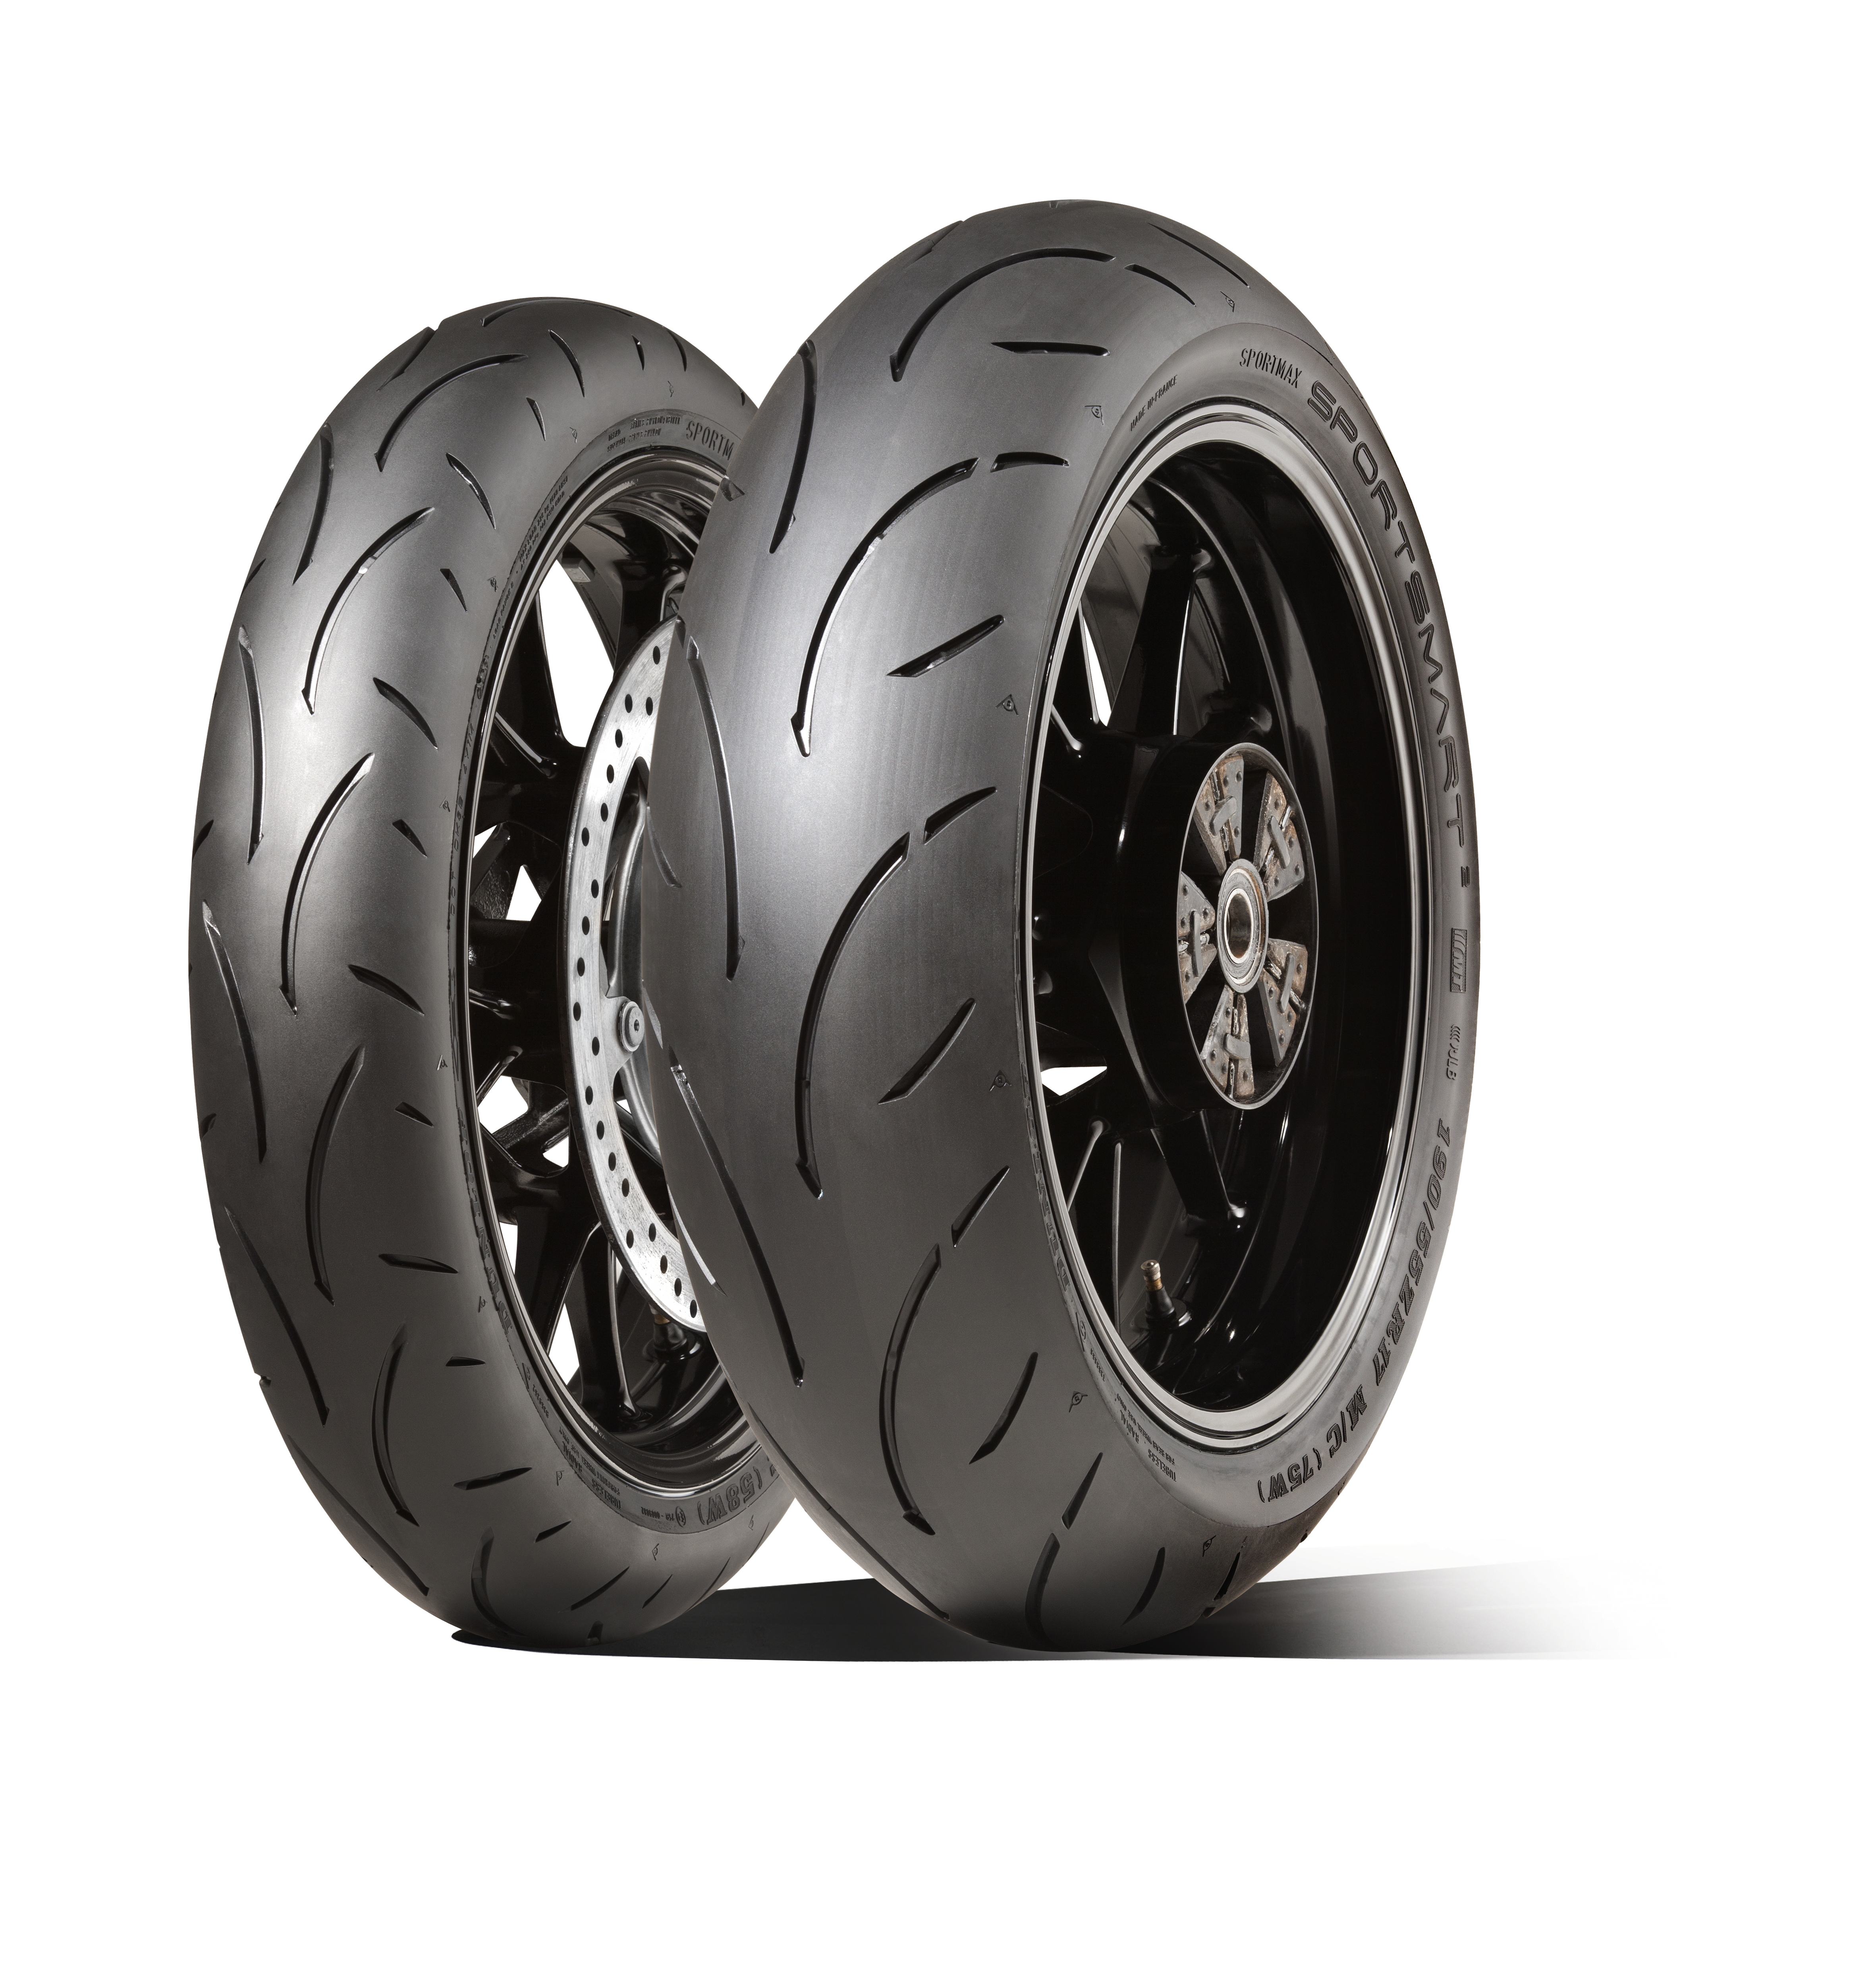 Dunlop's new Sportsmart2 tyre review